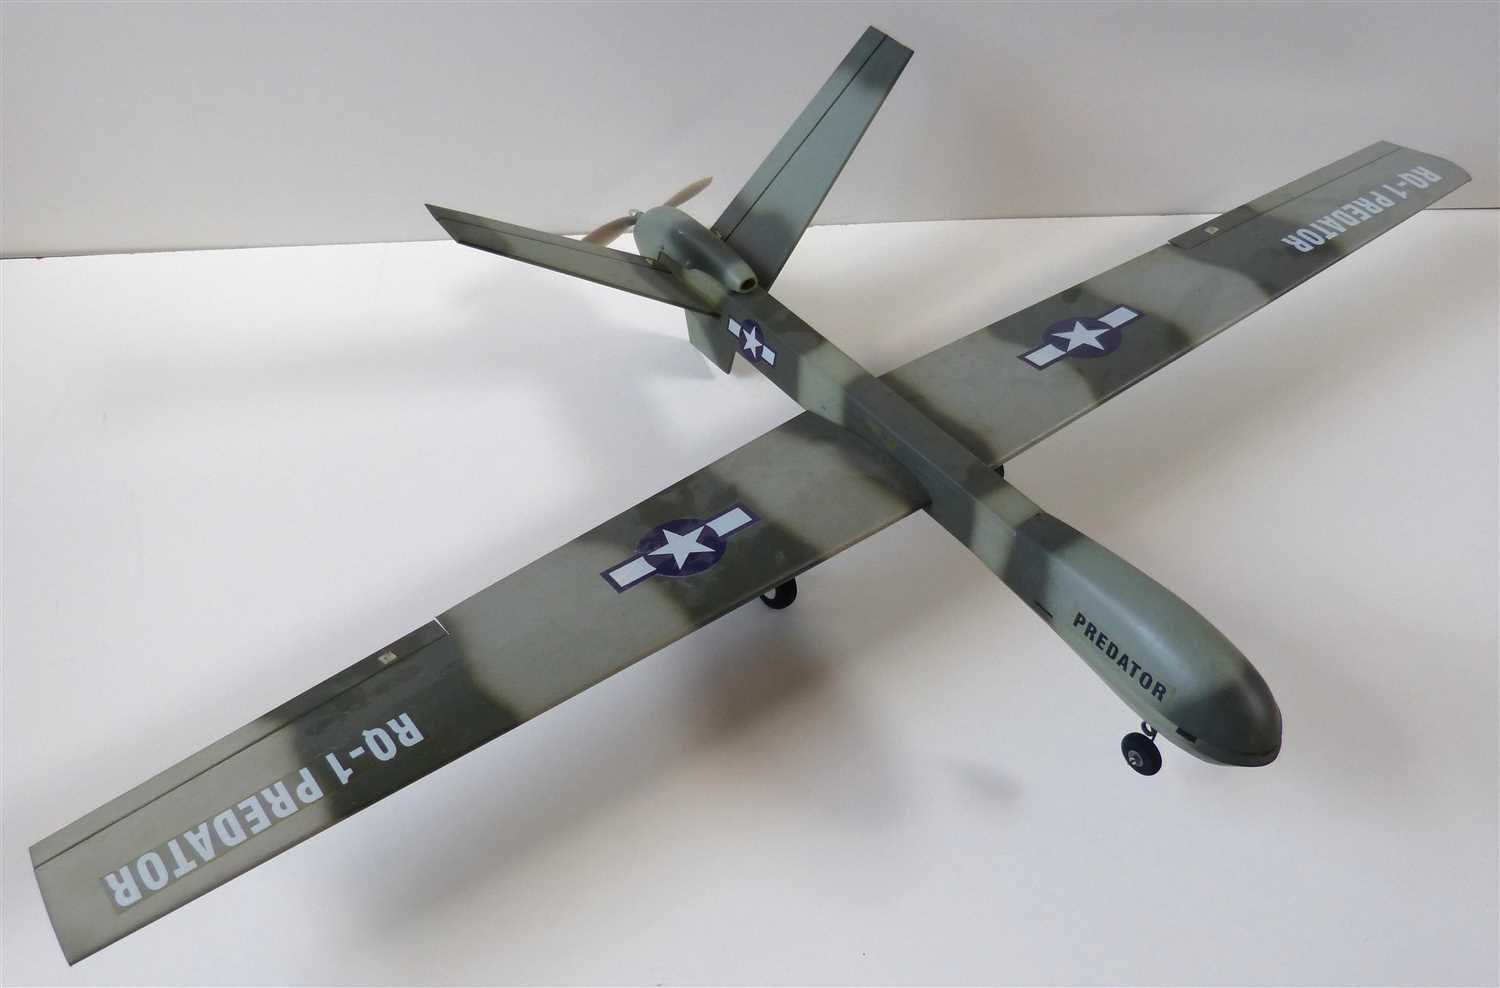 Lot 230 - Remote control Predator RQ-1 American type drone plane (needs transmitter and receiver).